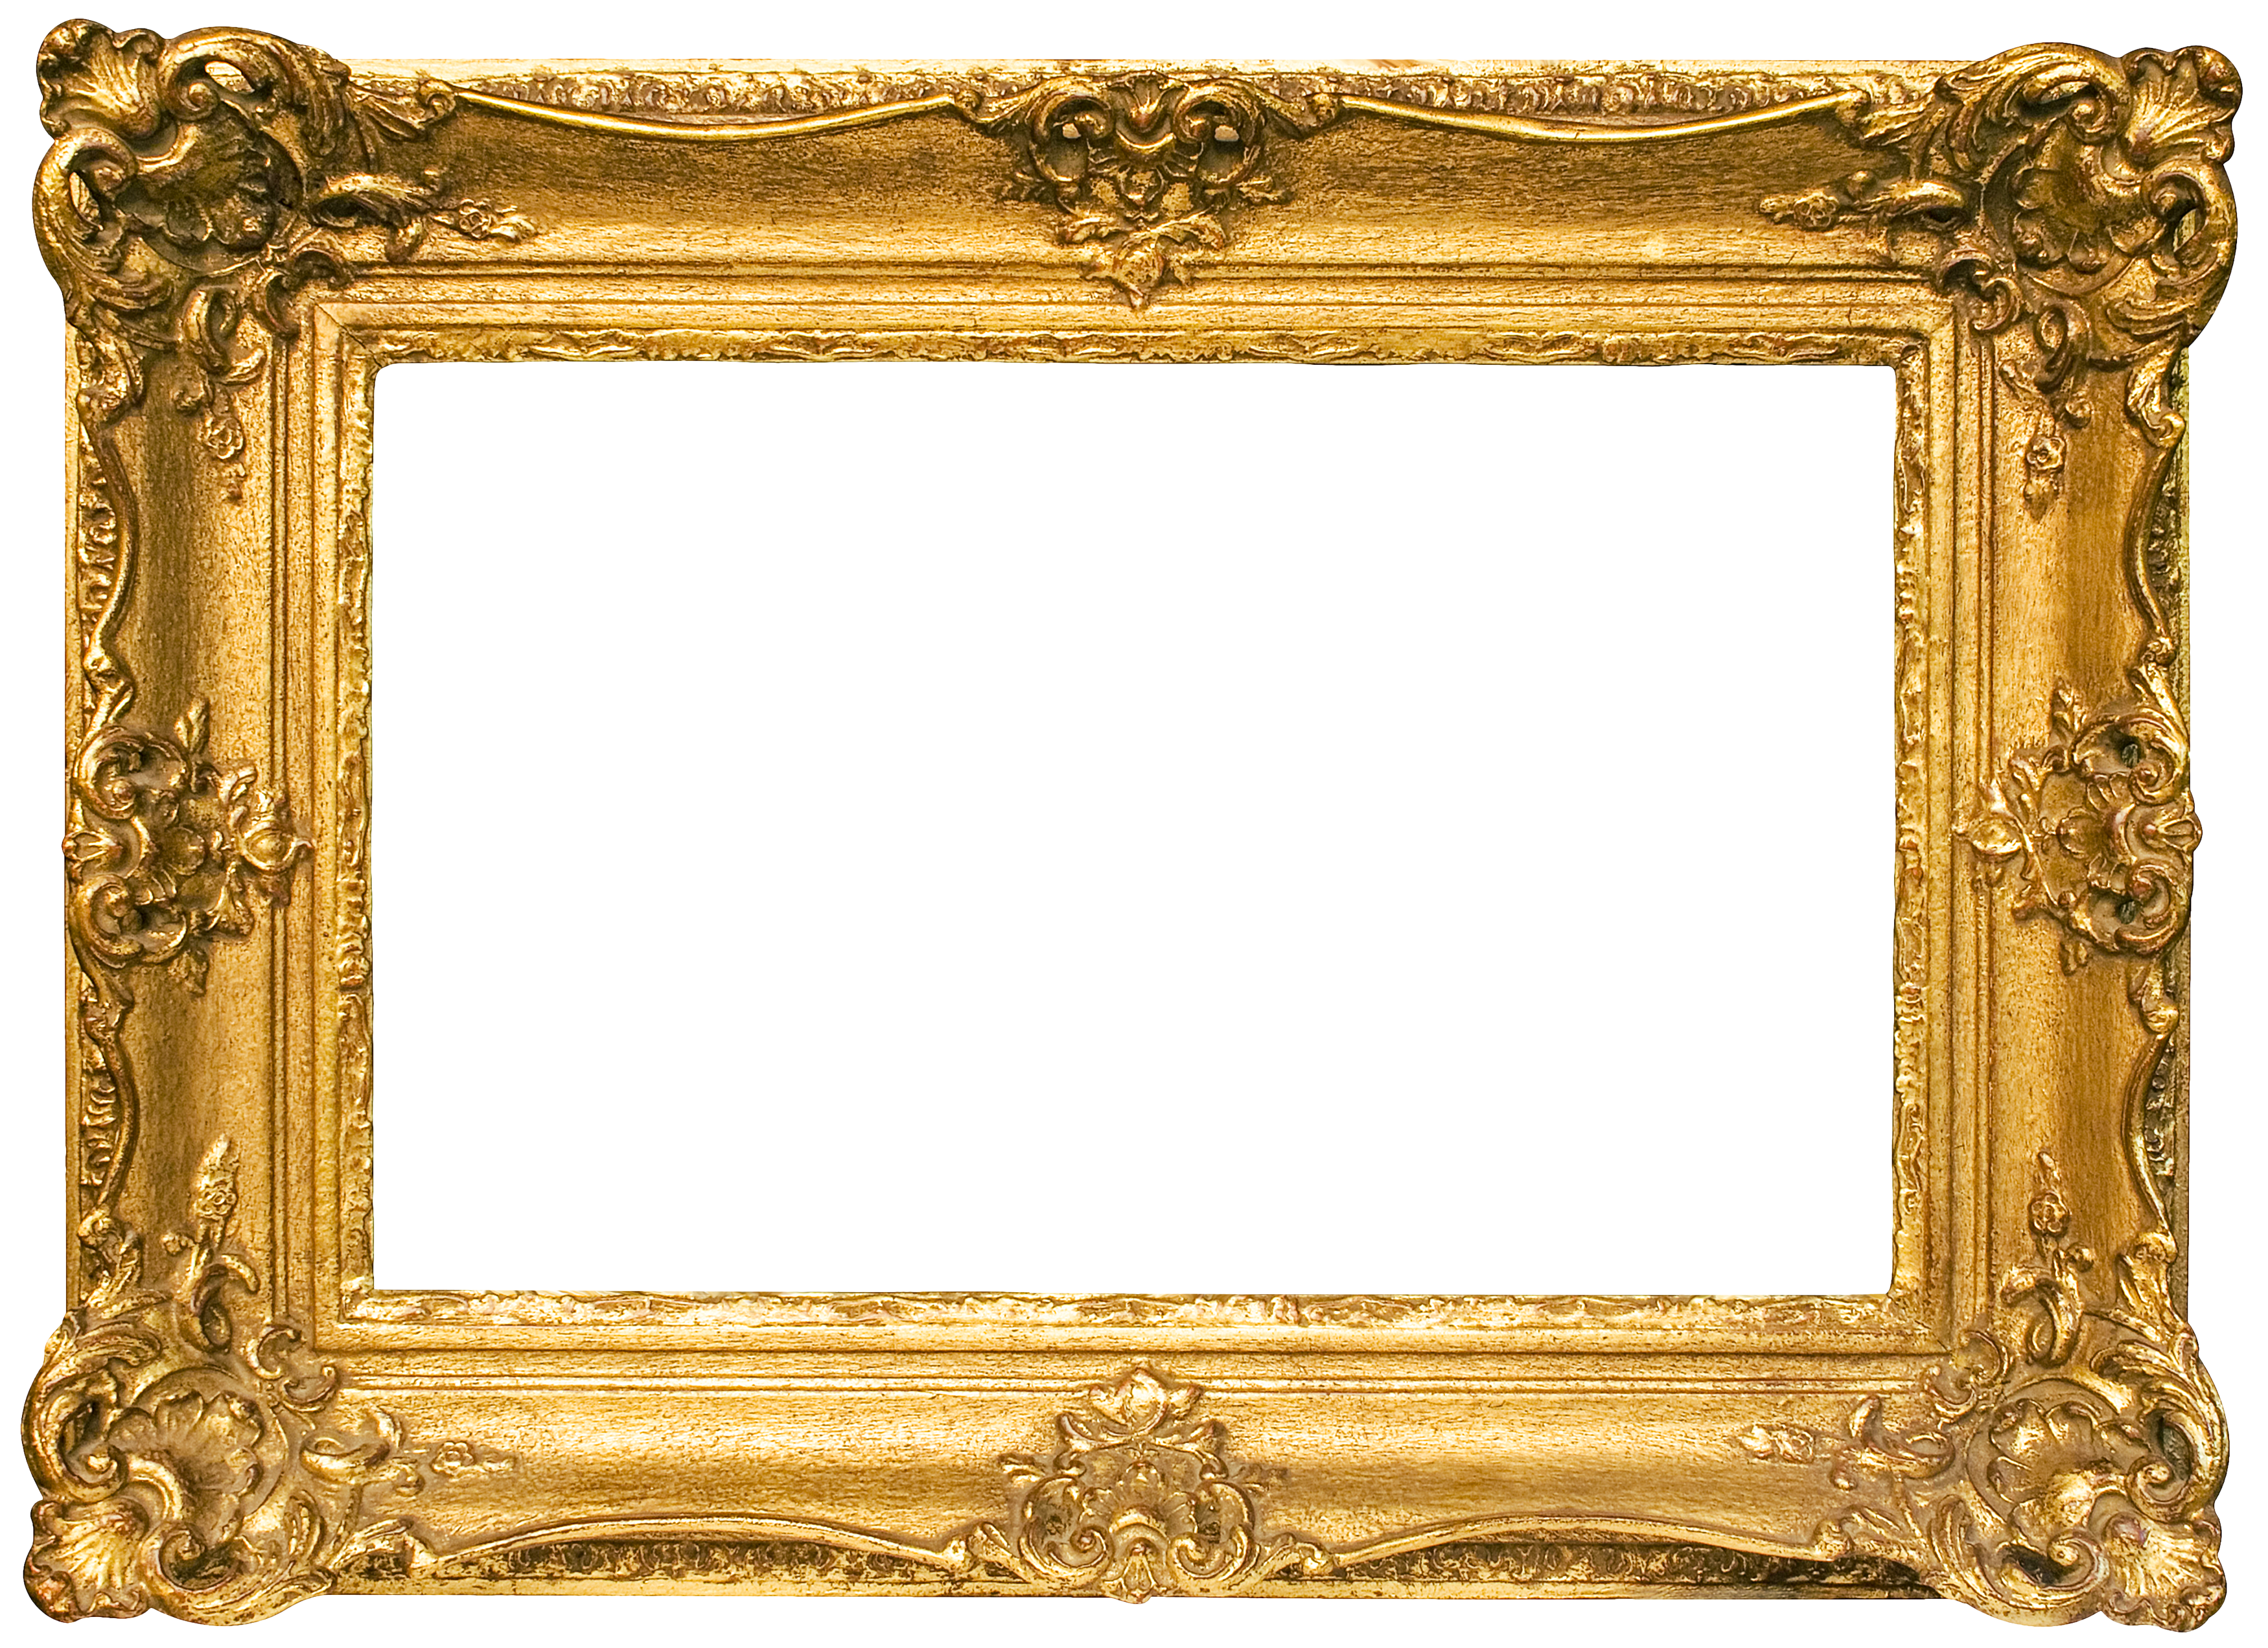 Classic Gold Frame Transparent PNG Image Quality Image And Transparent PNG Free Clipart